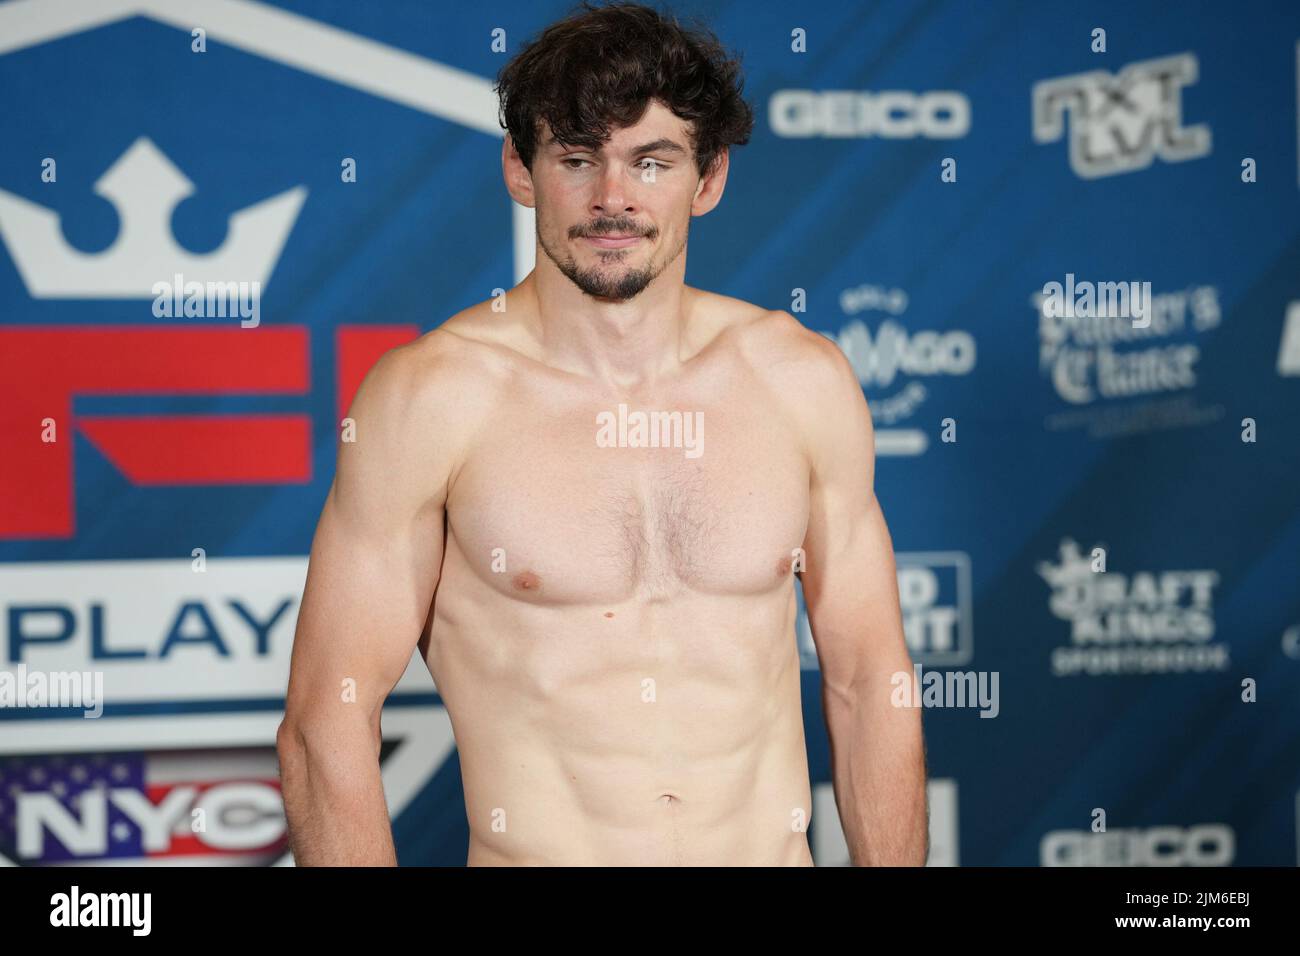 NEW YORK CITY, NY - August 4: Olivier Aubin-Mercier steps on the scale for the official weigh-ins at The New Yorker Hotel for 2022 PFL Playoffs Semi-Finals : Official Weigh-ins on August 4, 2022 in New York City, NY, United States. (Photo by Louis Grasse/PxImages) Stock Photo